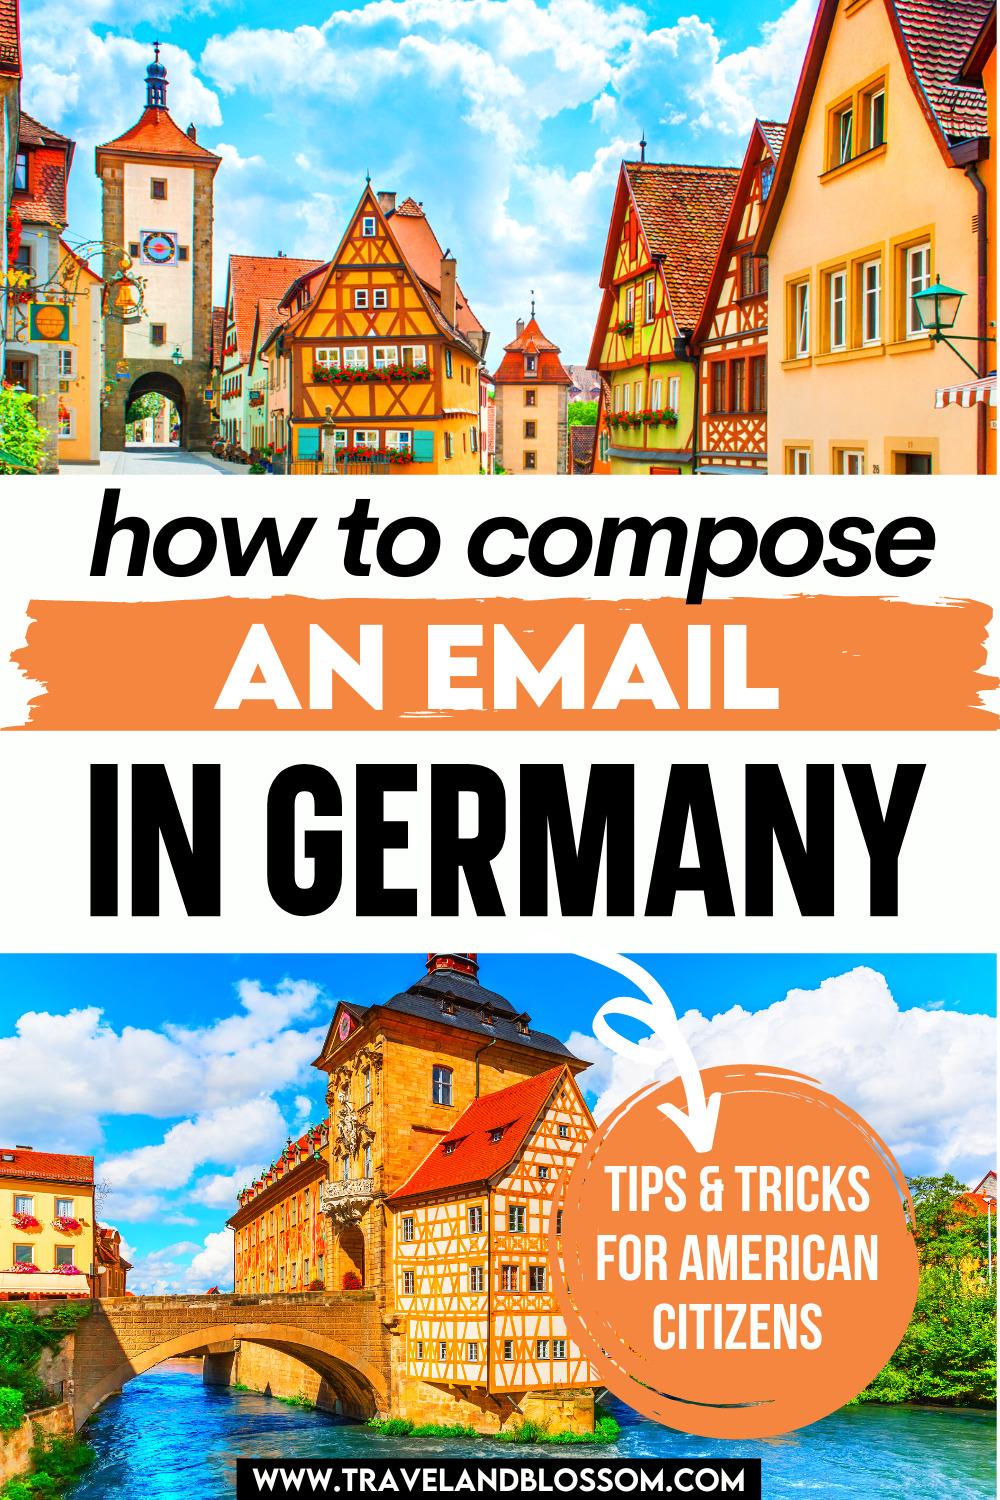 The American Guide to Writing German Emails